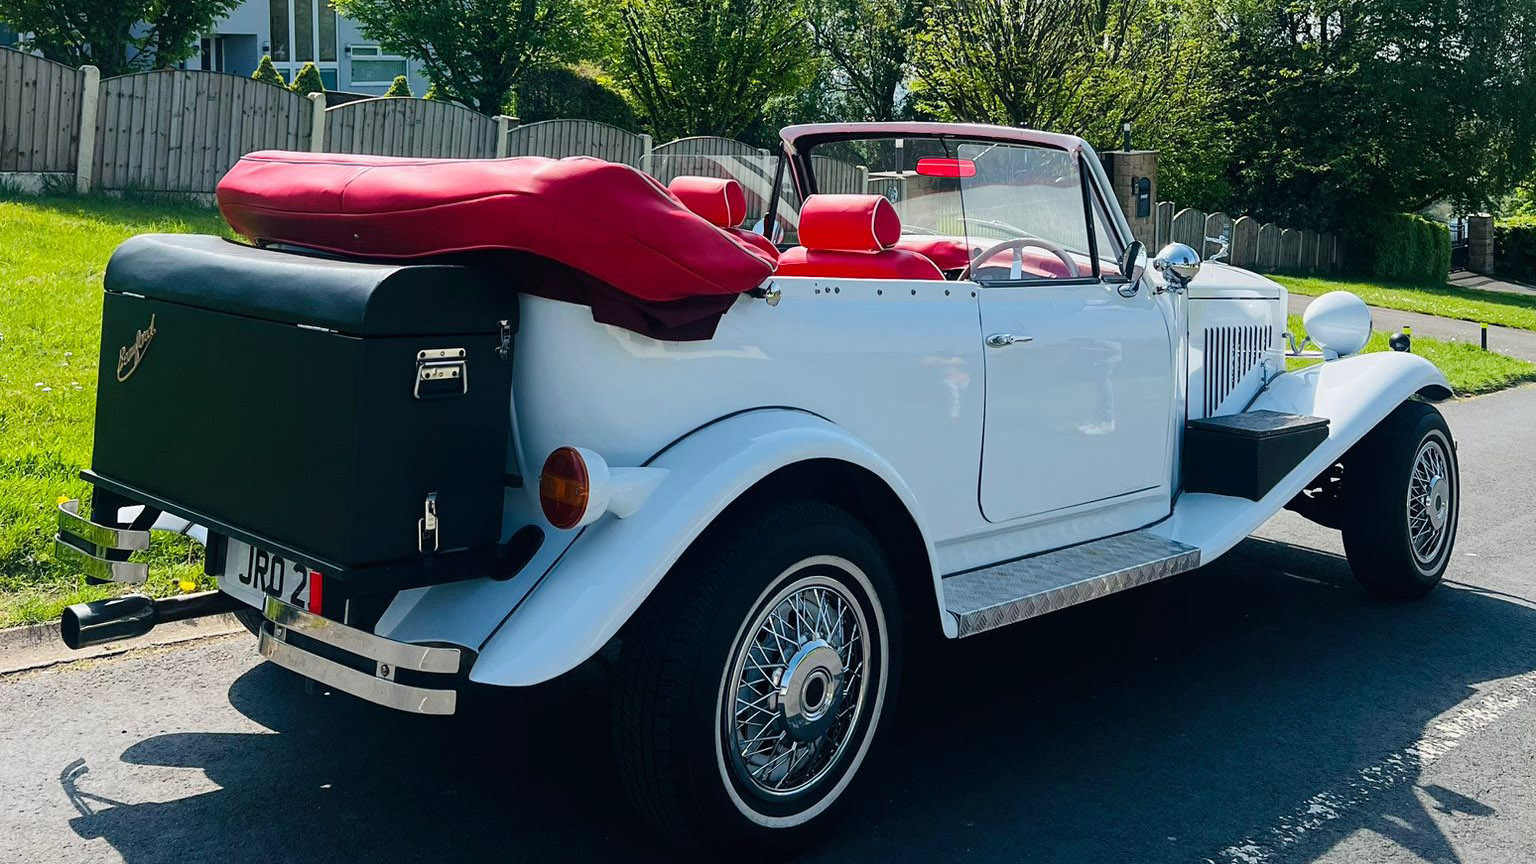 Right side view of White Beauford with roof tucked away in a red cover and black picnic trunk at the rear of the vehicle